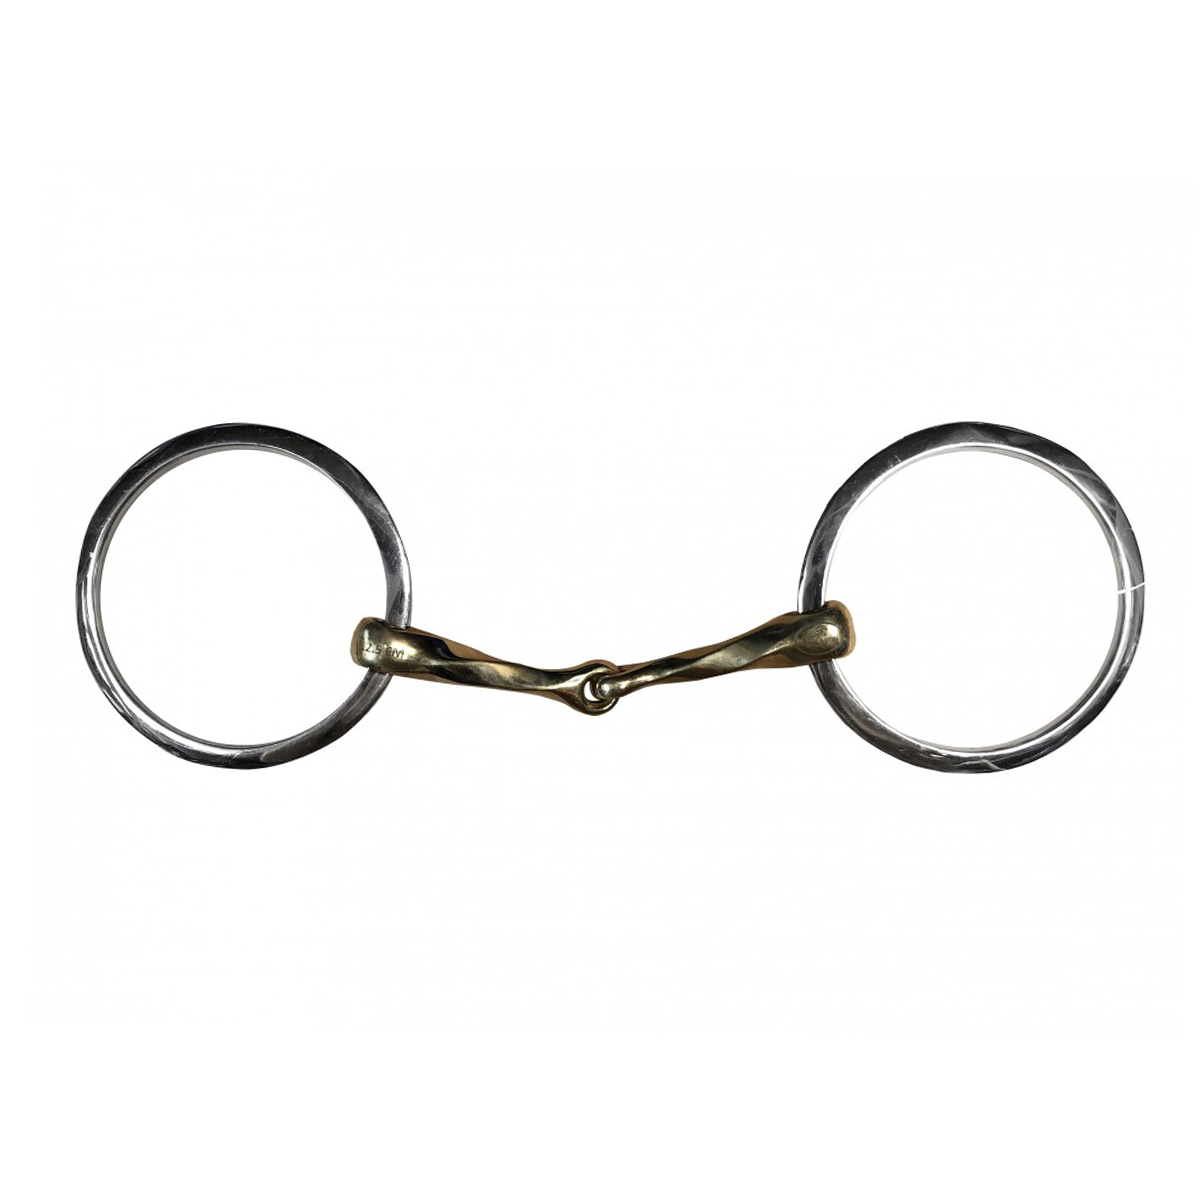 Jump'in Twisted Loose Ring Bit